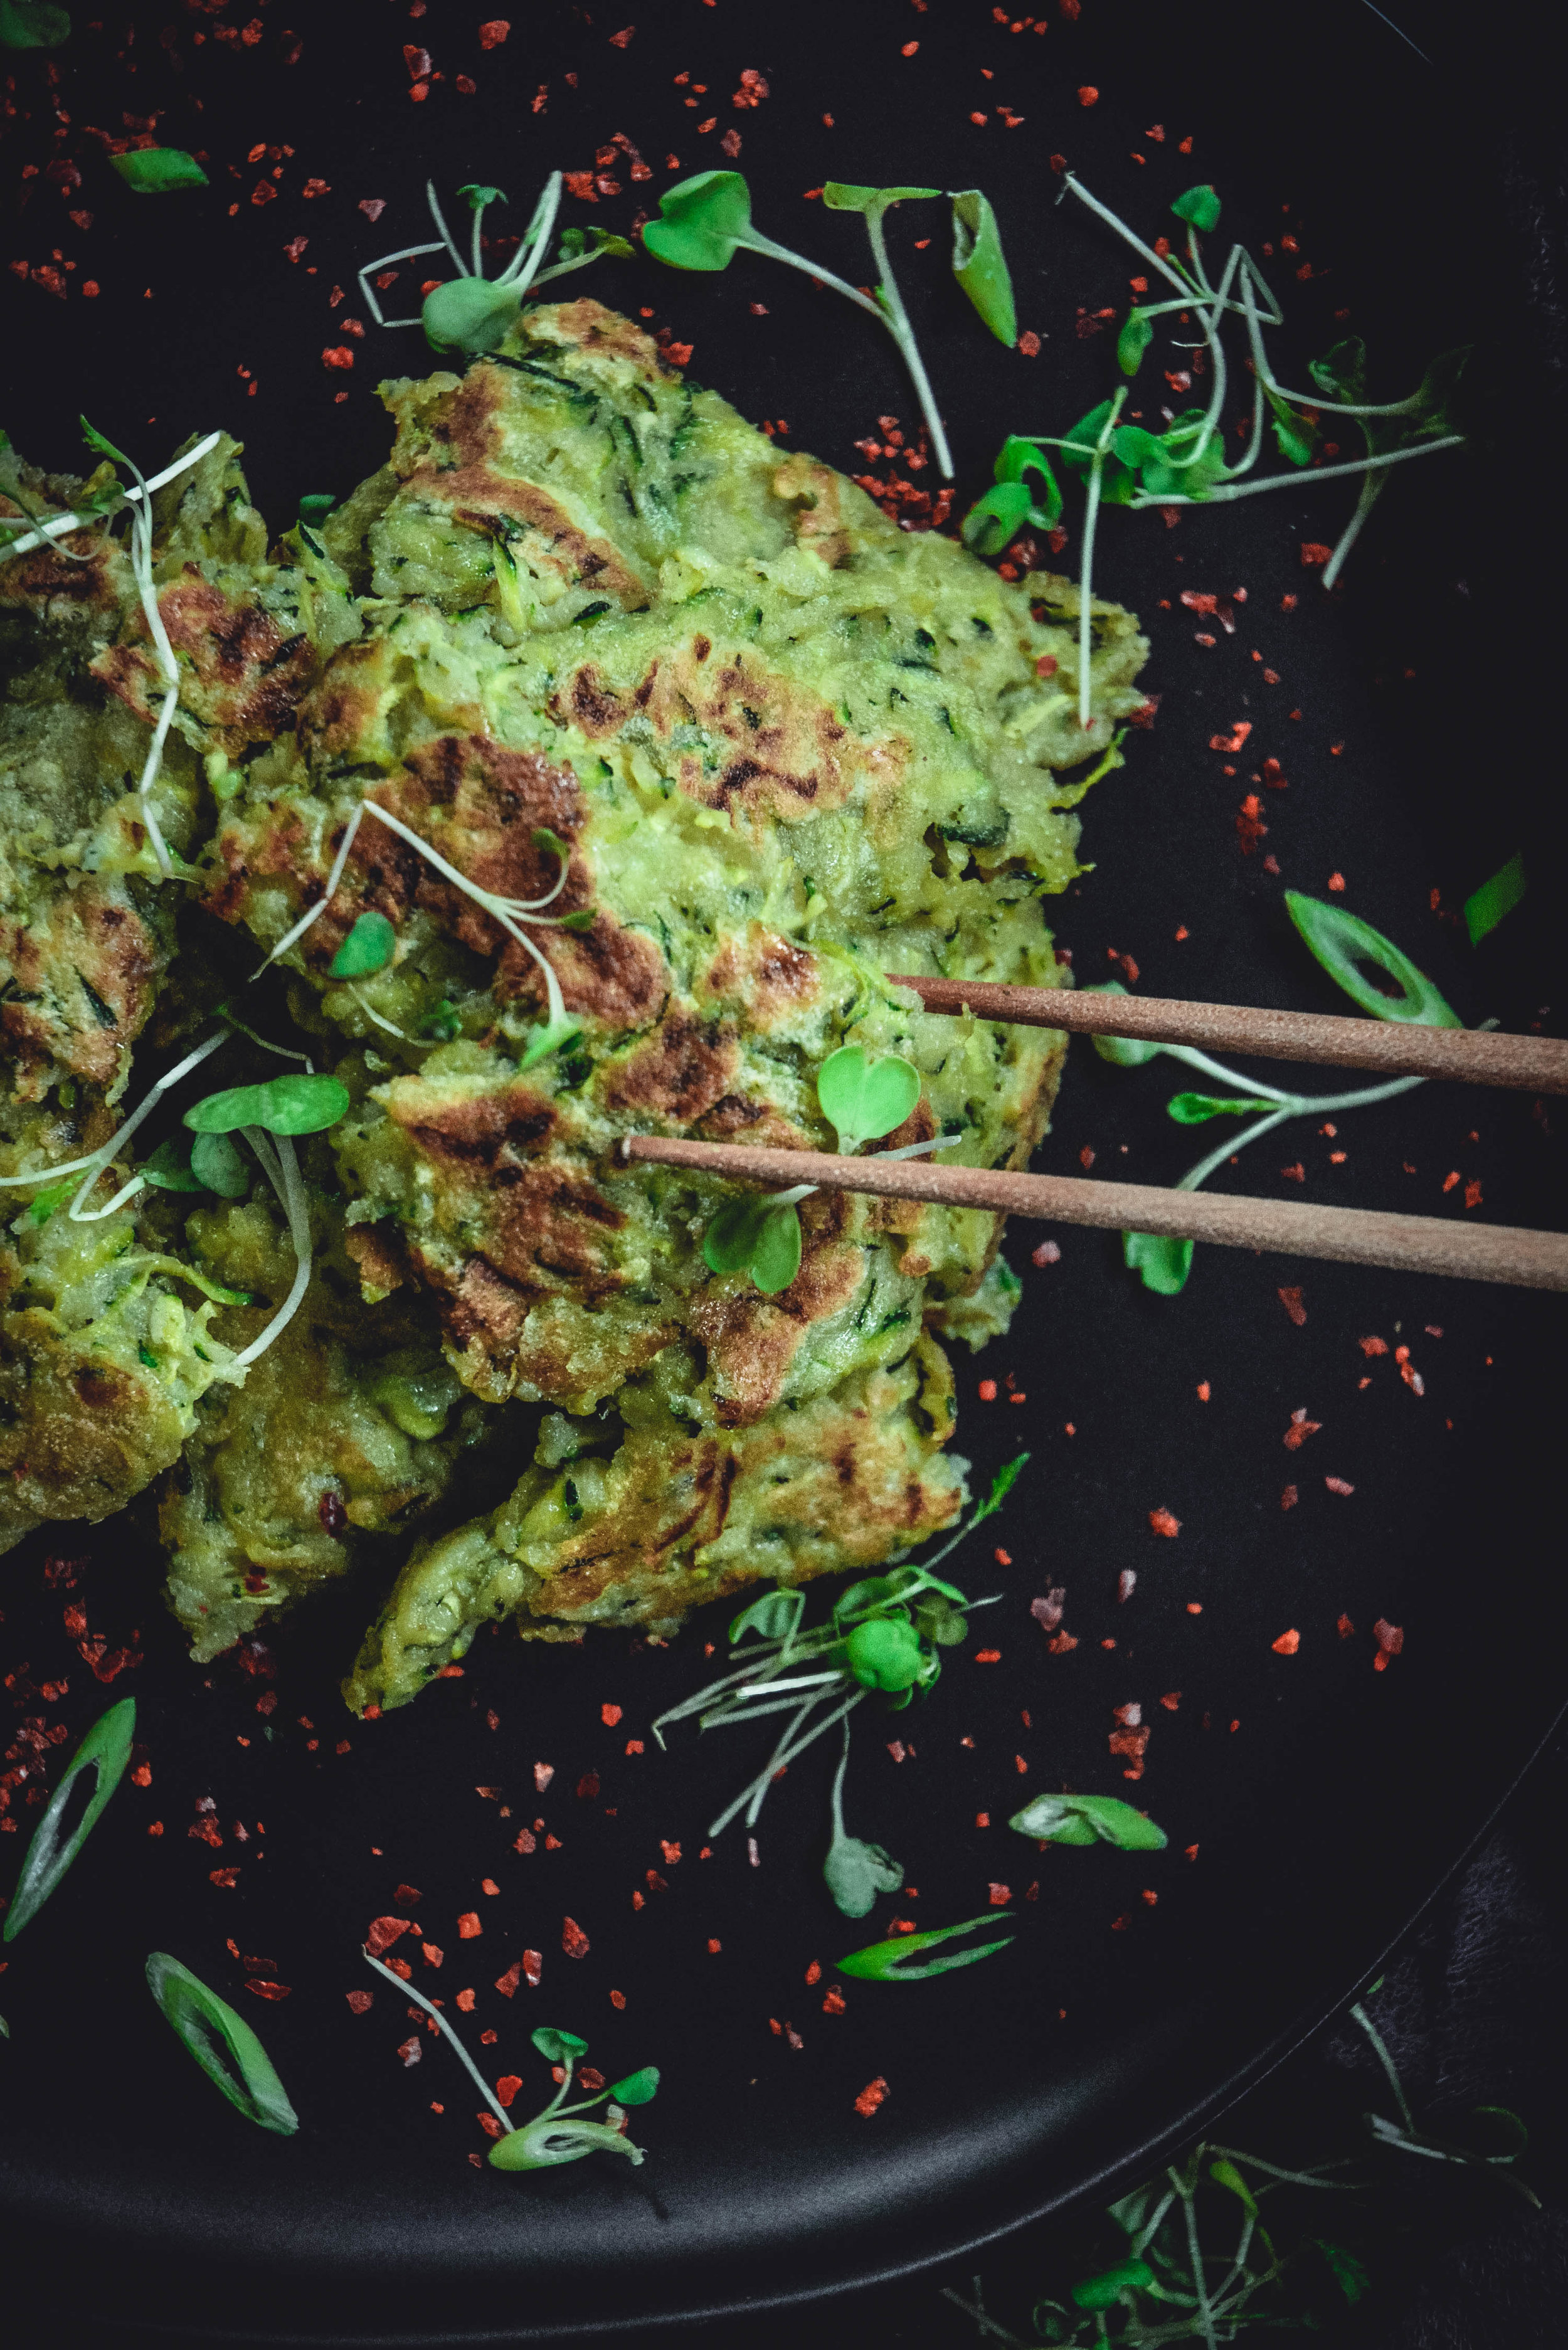  A delicious crispy zucchini pancakes dipped in a mouthwatering sweet and sour sauce. Recipe created by Jean Choi, author of Korean Paleo. @whatgreatgrandmaate #whatgreatgrandmaate #koreanpaleocookbook #koreanfood #zucchinipancakes #koreanzucchinipancakes #paleo #vegan #glutenfree #dairyfree #calmeats #jeanchoi 